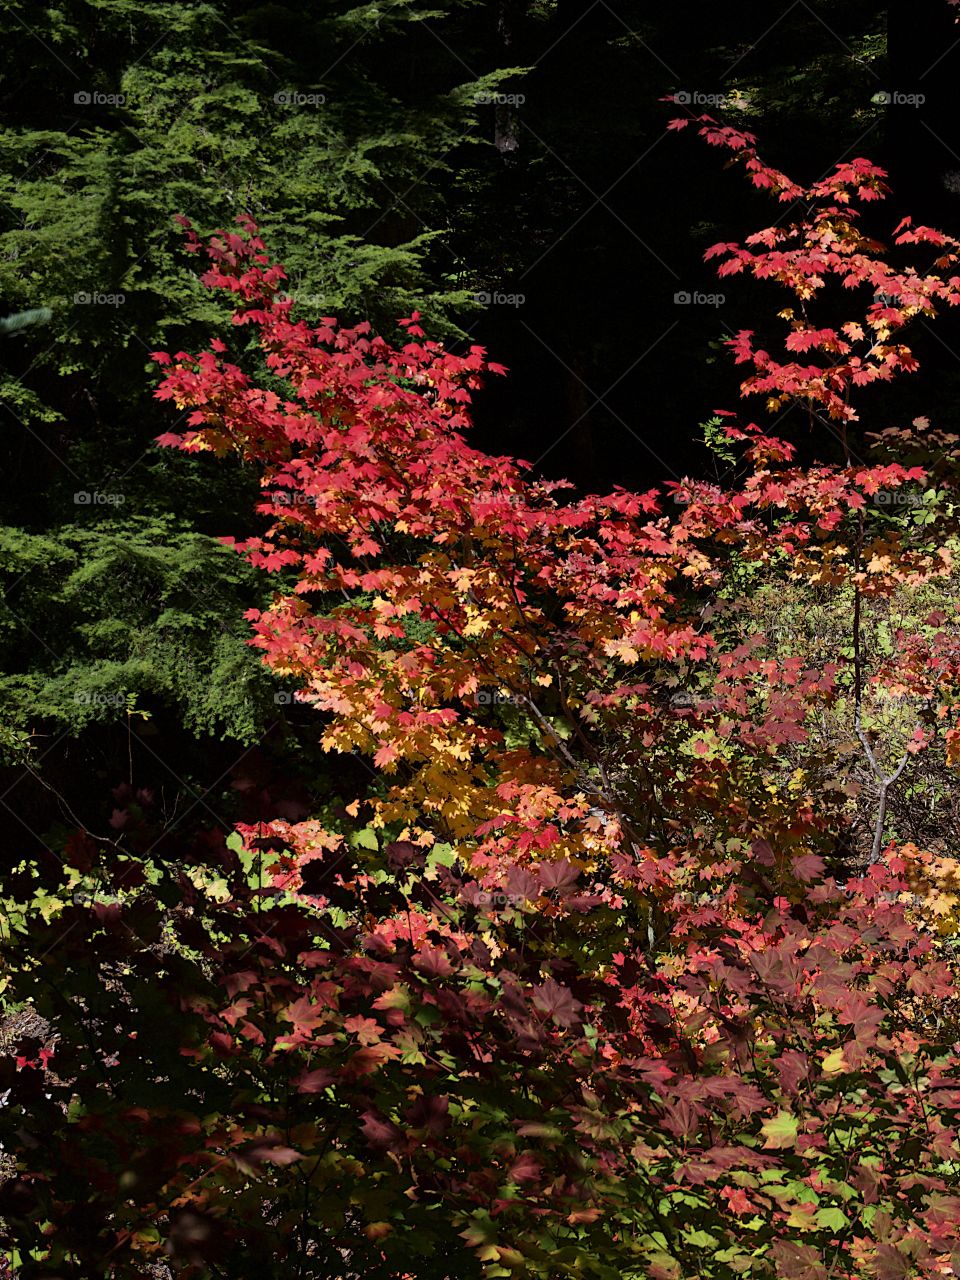 Maple trees in the forests of Western Oregon with leaves shining in their stunning fall colors of red, orange, and yellow on a sunny autumn day. 